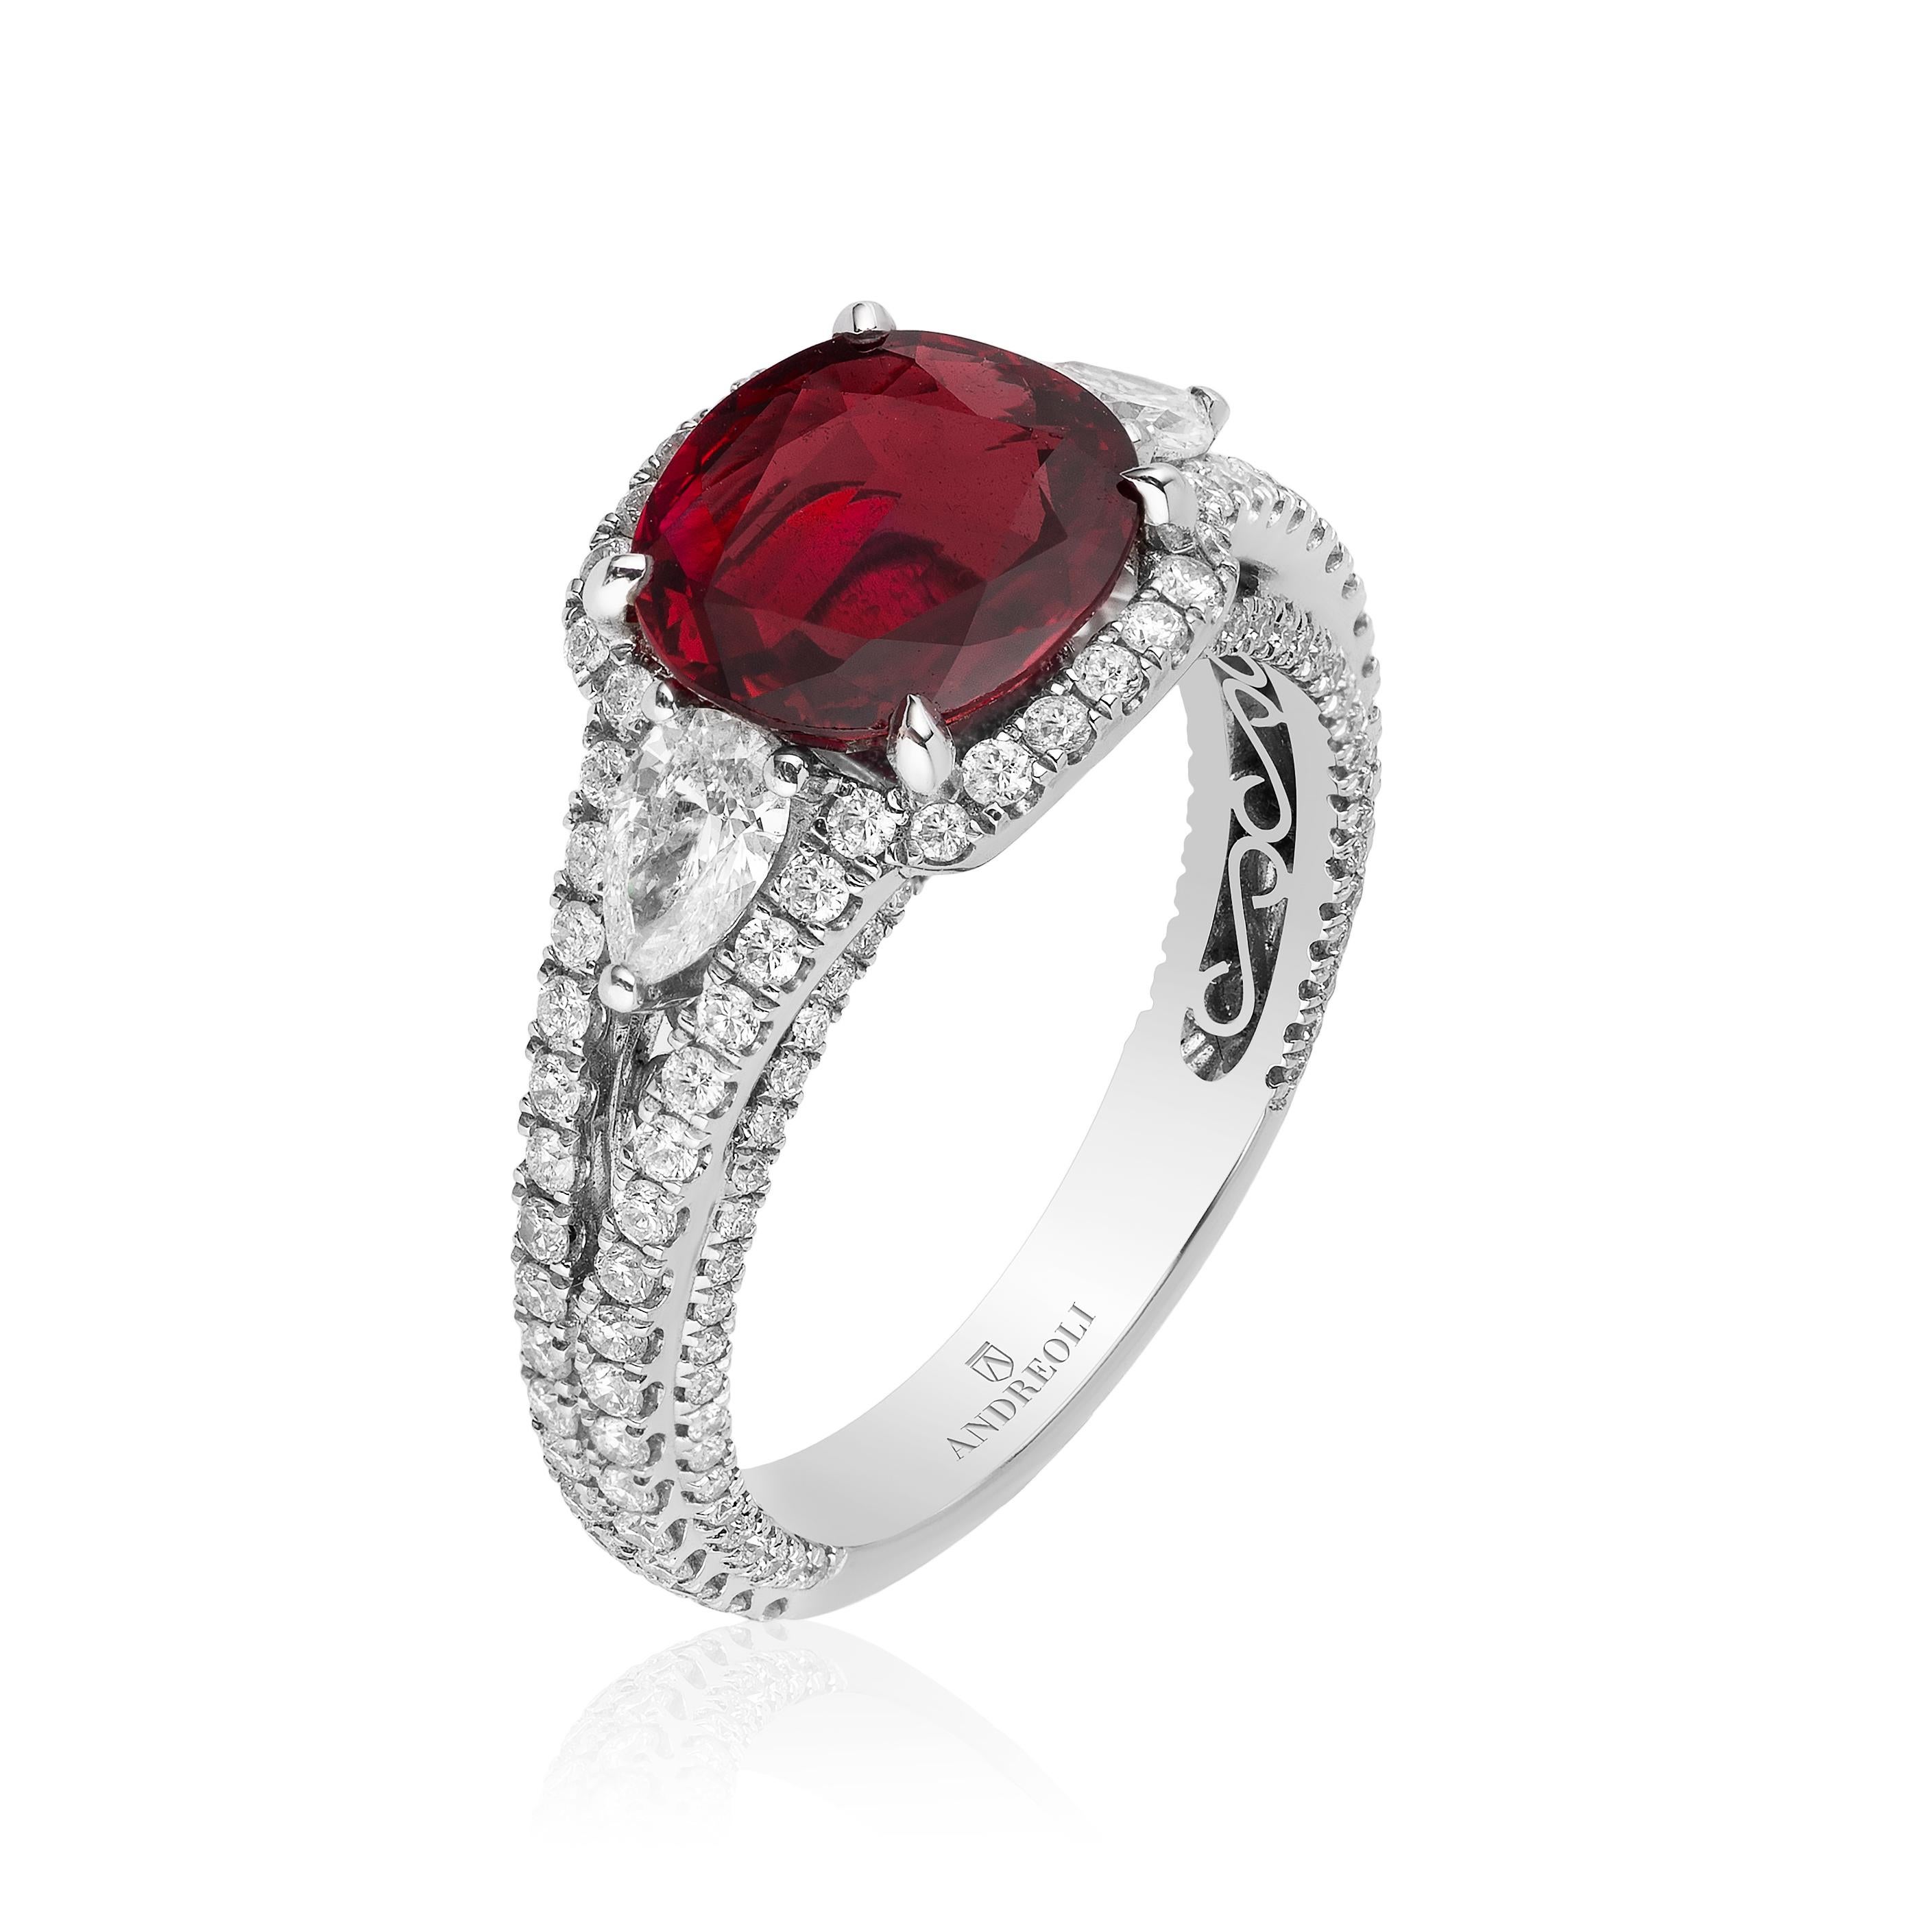 Contemporary Andreoli GIA Certified 1.98 Carat Pigeon Blood Ruby Thailand Diamond Ring 